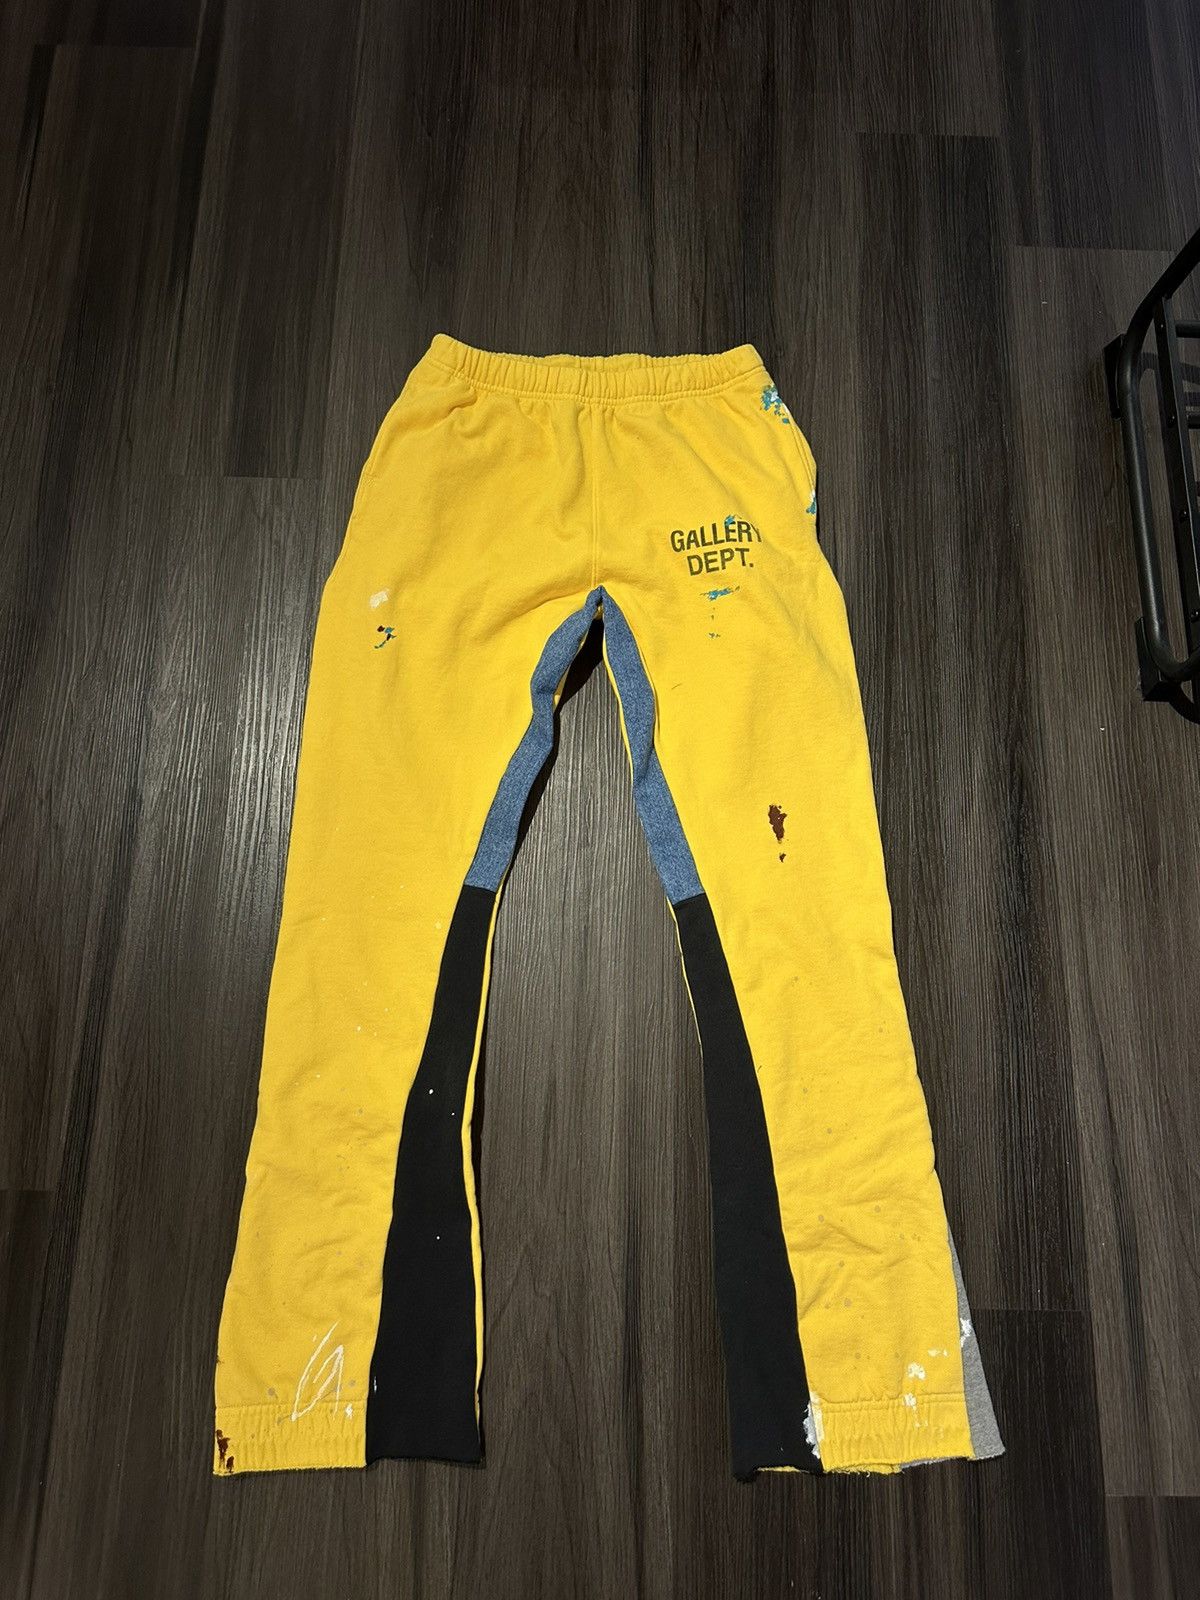 Gallery Dept Flare Sweatpants | Grailed